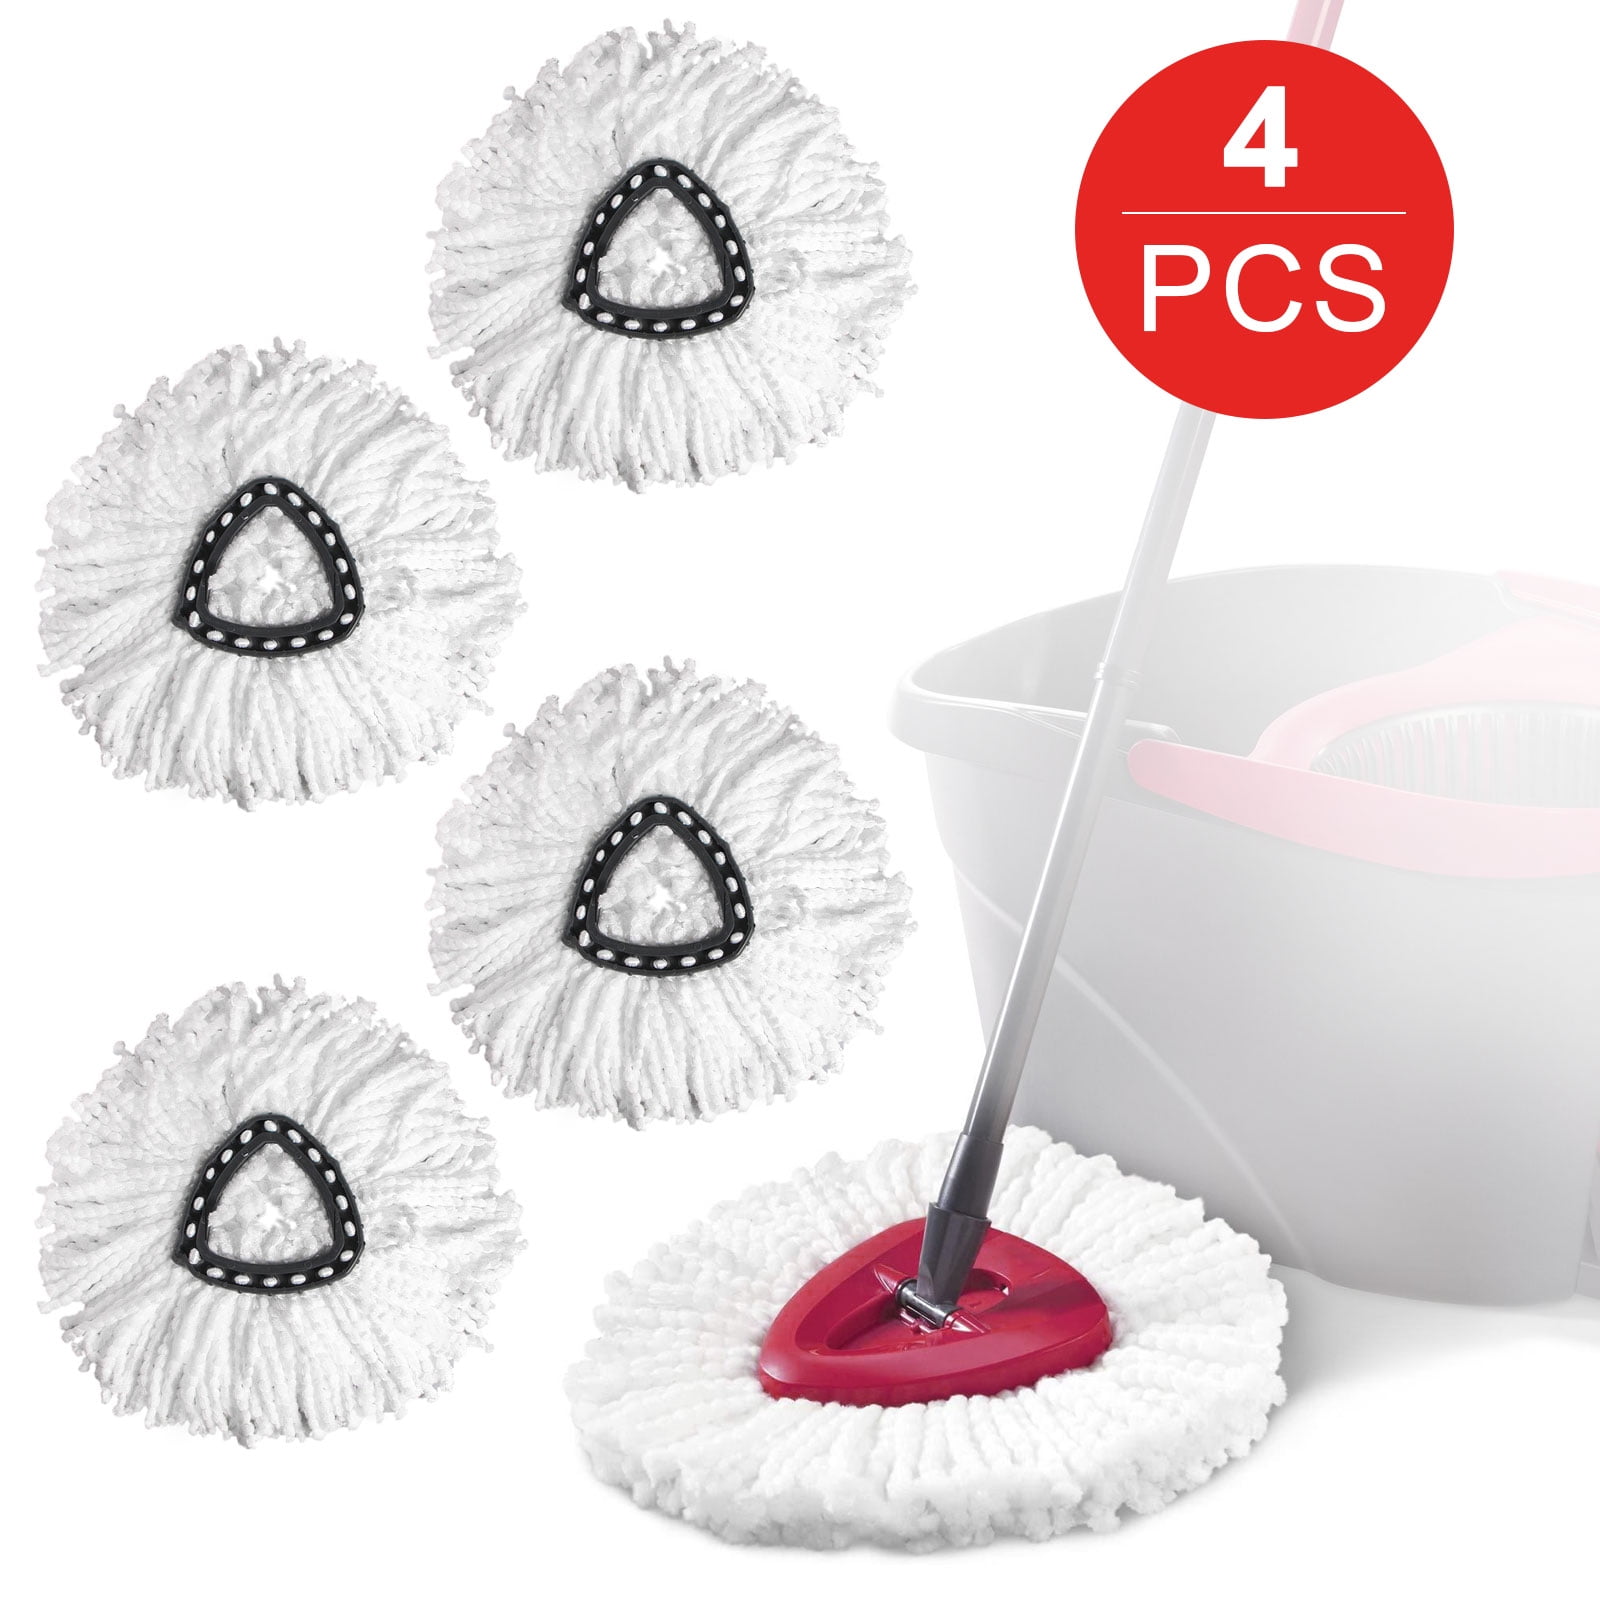 2 Pack Mop Heads Replacements Compatible with Spin Mop Spin Mop Replacement Head Microfiber Mop Refill Replace Head 